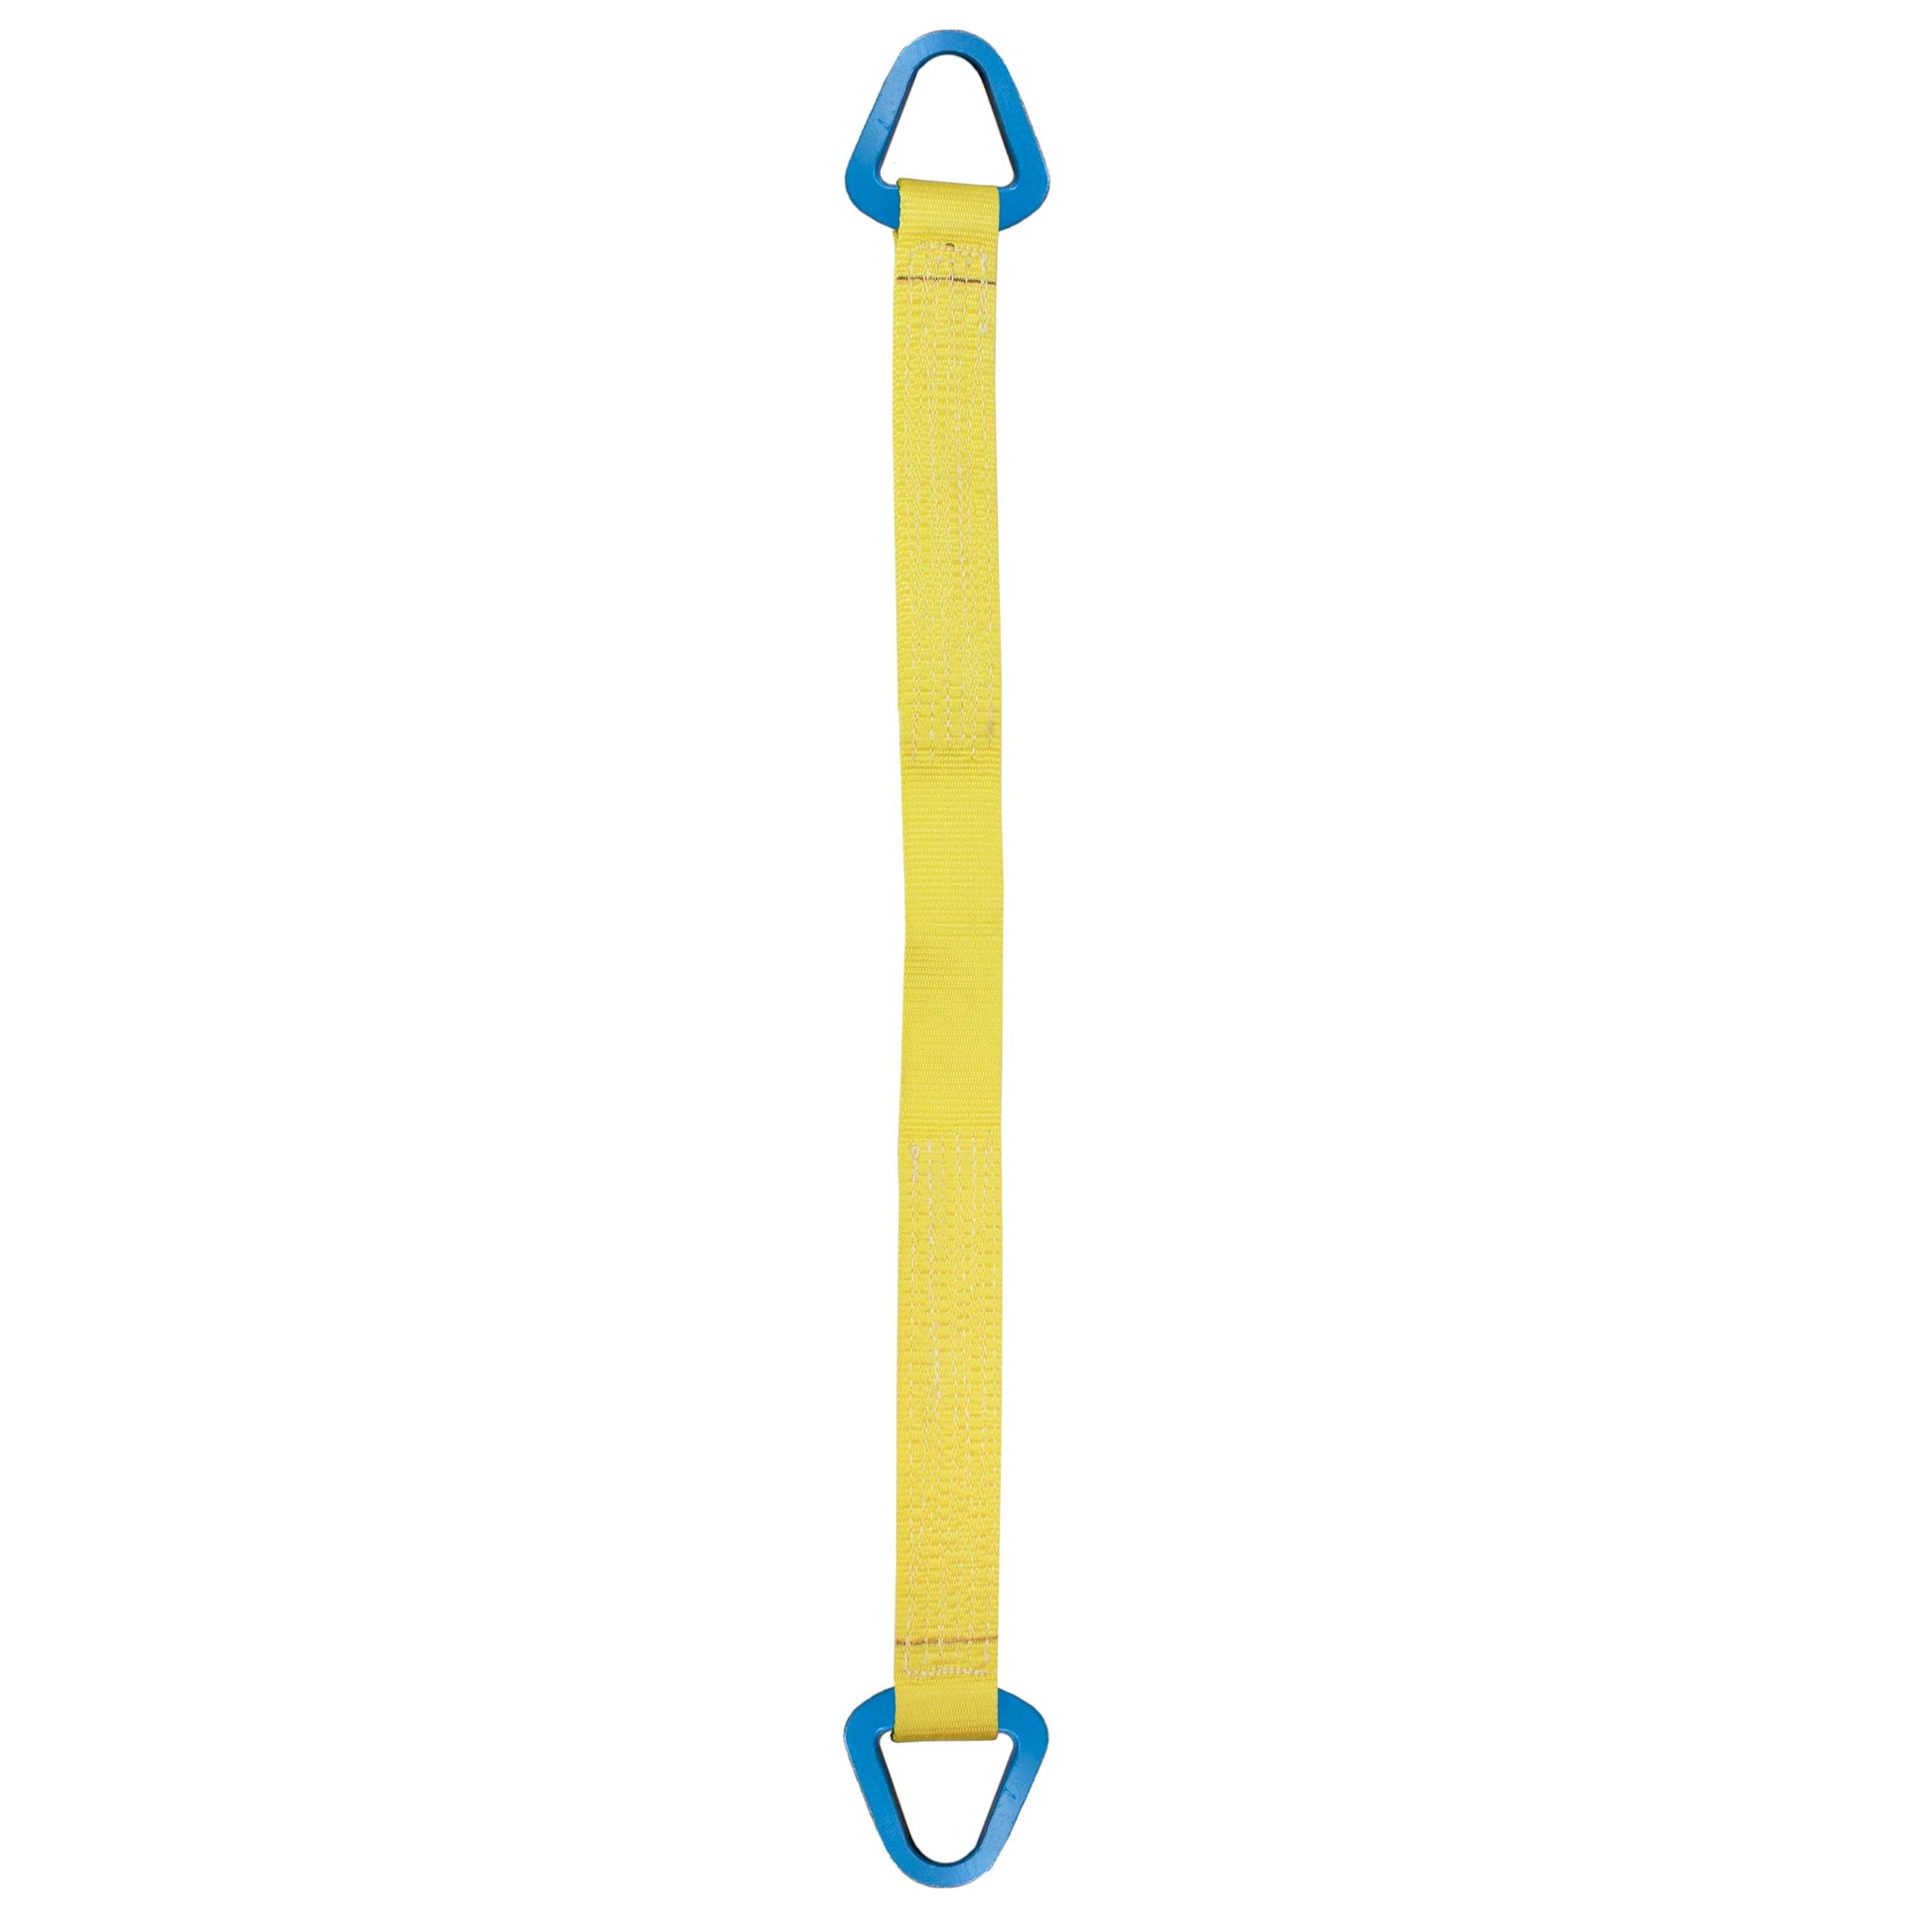 Nylon Lifting Sling Triangle 12 inch x 20 foot 1ply image 1 of 2